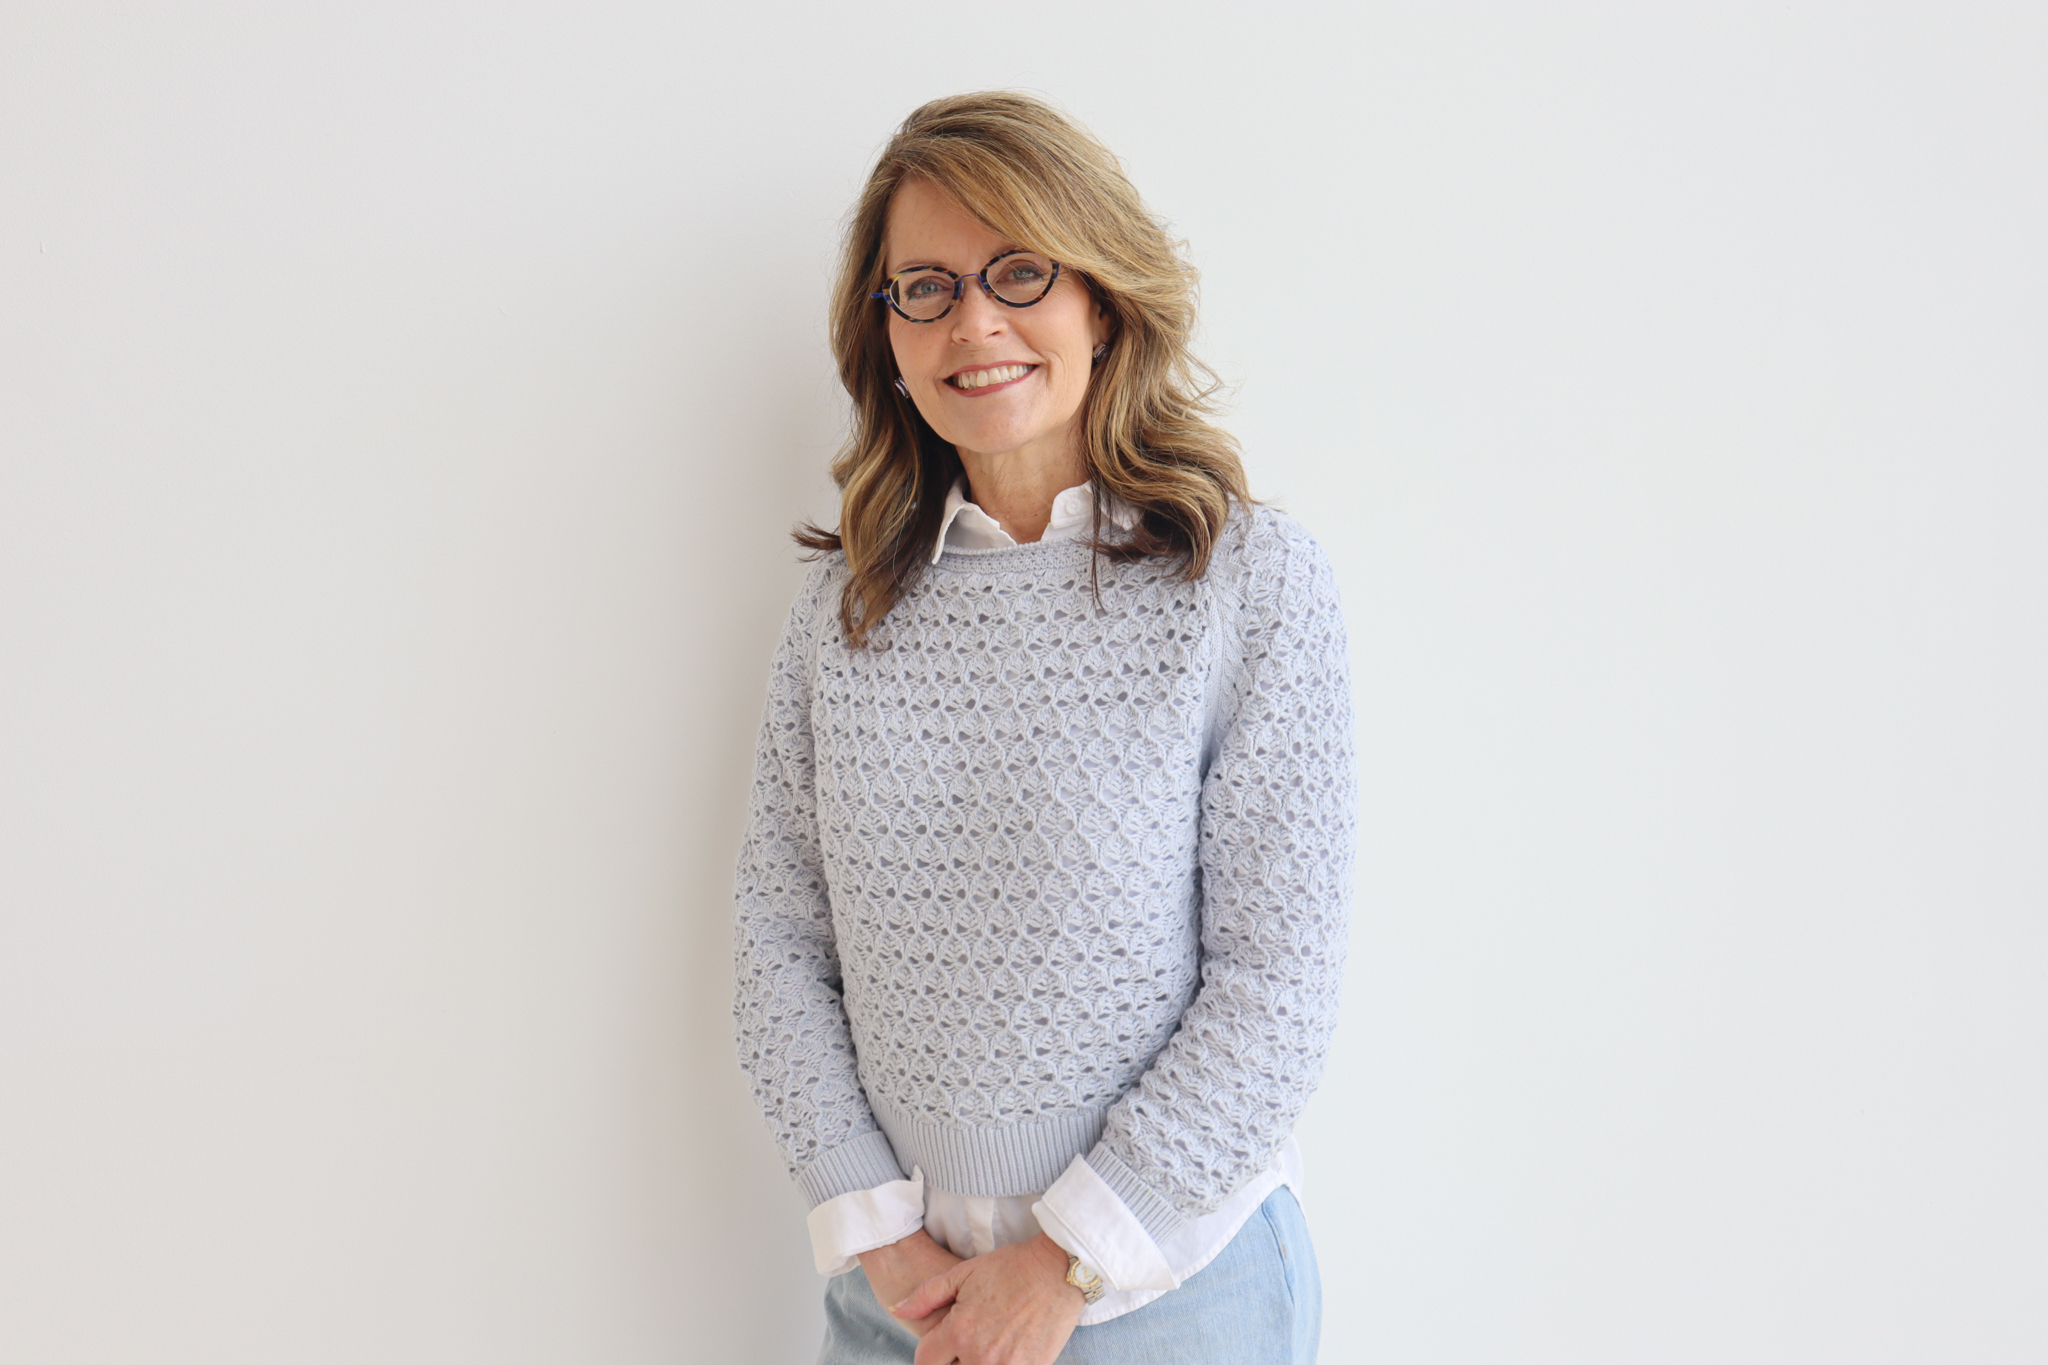 A person stands in front of a white wall. They have on a light blue sweater with white cuffs and white collar. Their hair is light brown, falling at their shoulders. They have small round glasses on and are smiling.